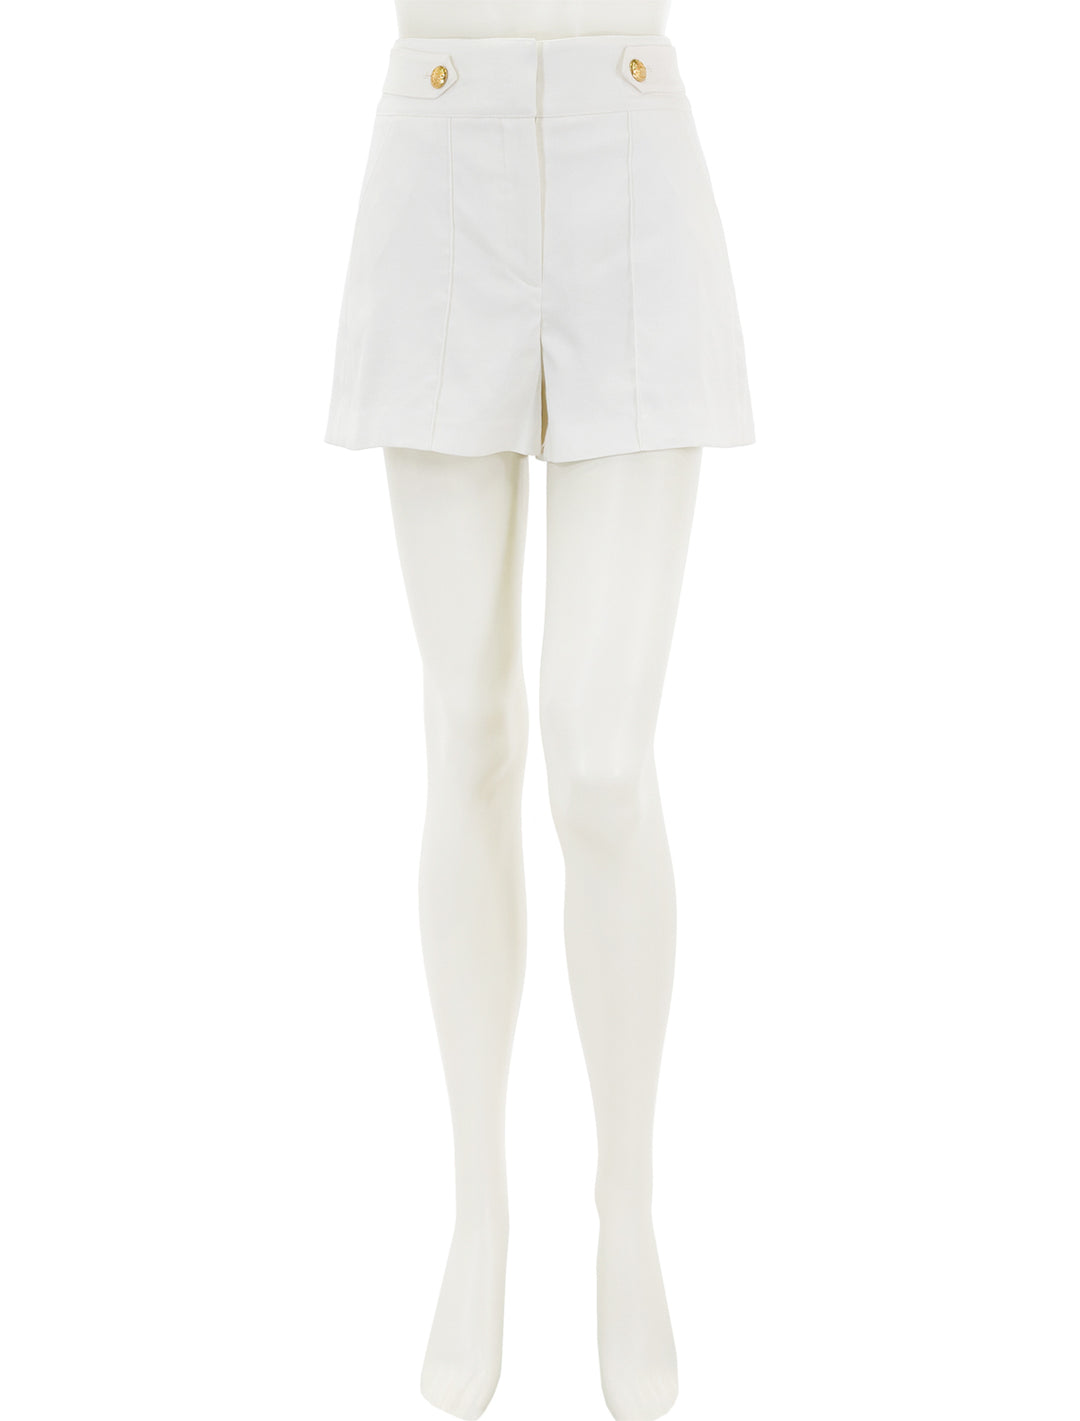 Front view of Veronica Beard's runo shorts in white.